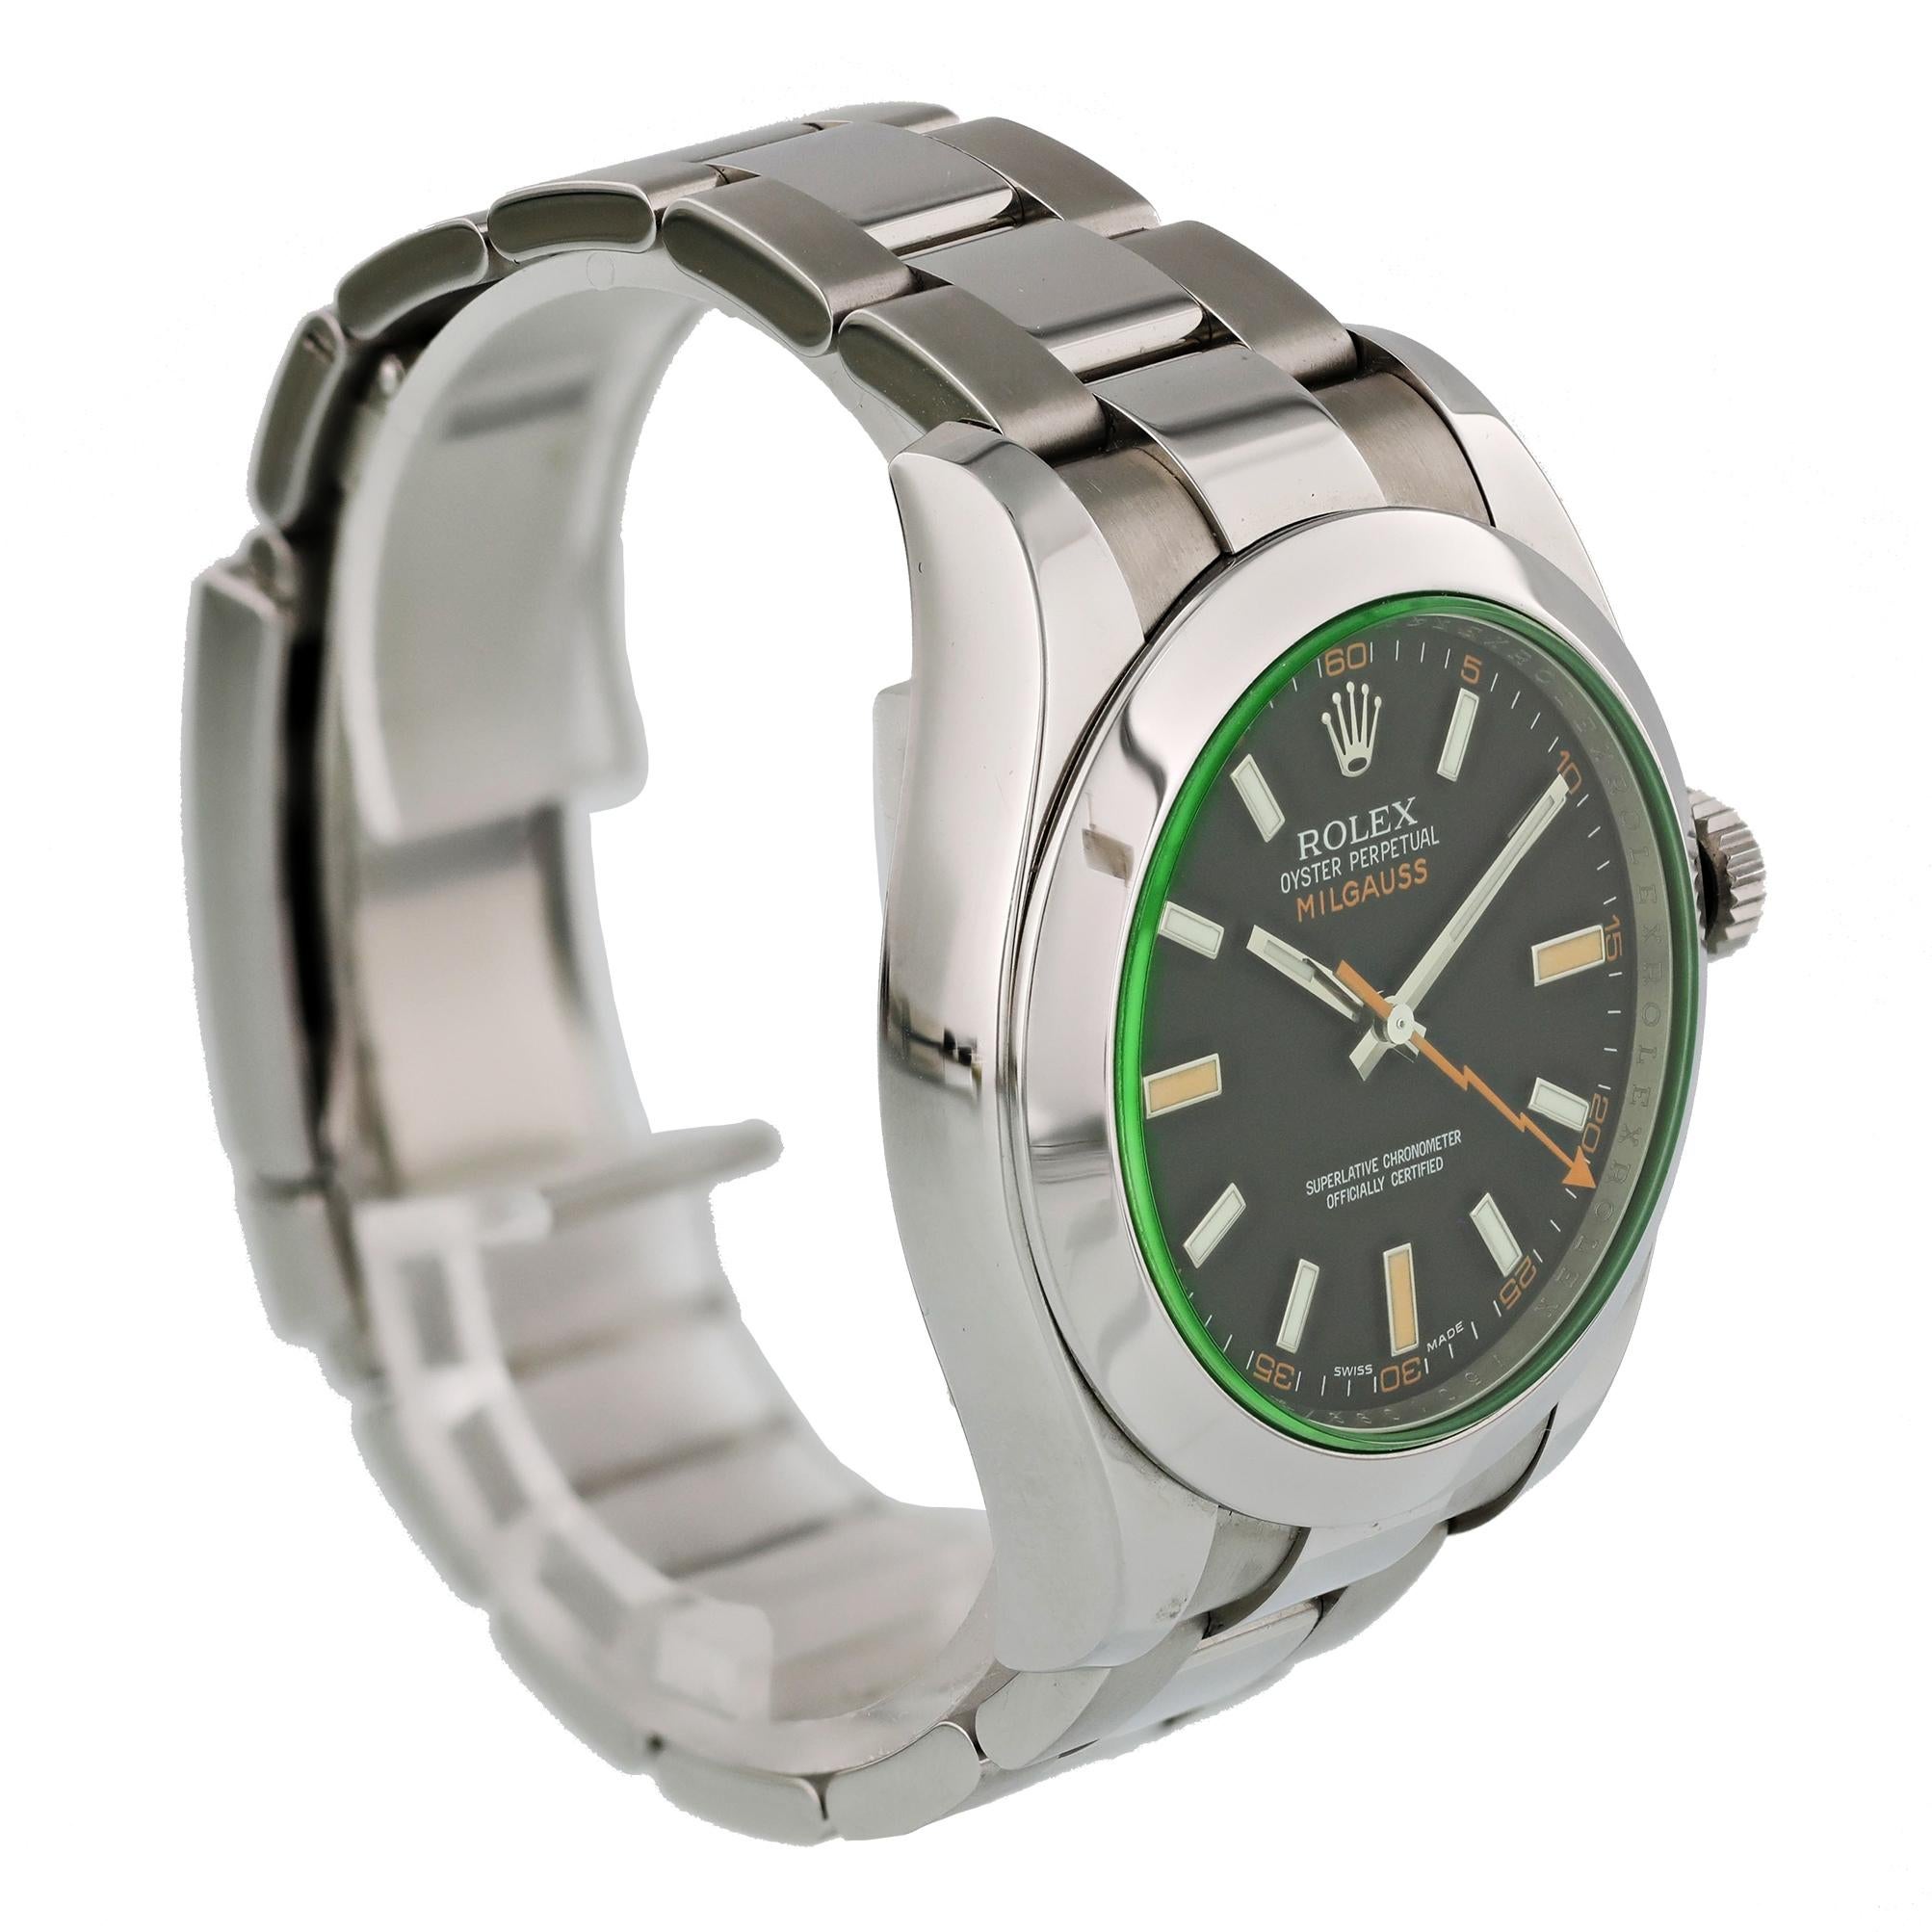 Rolex Milgauss 116400GV Men's Watch In Excellent Condition For Sale In New York, NY